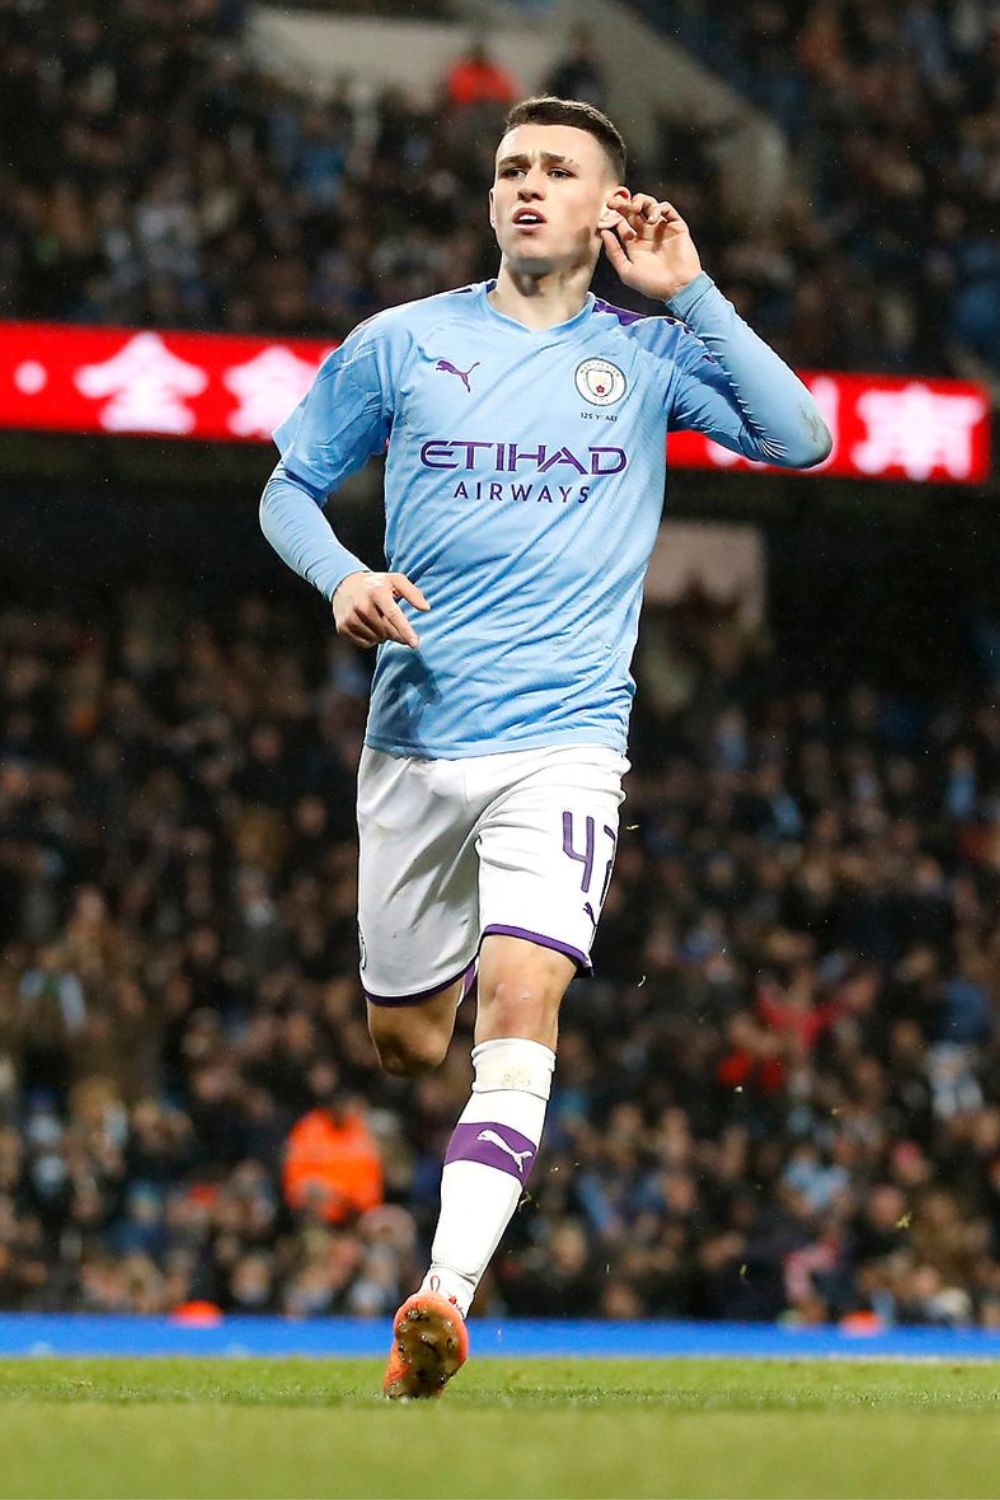 Foden Is Celebrating His First-Ever Premier League Goal.